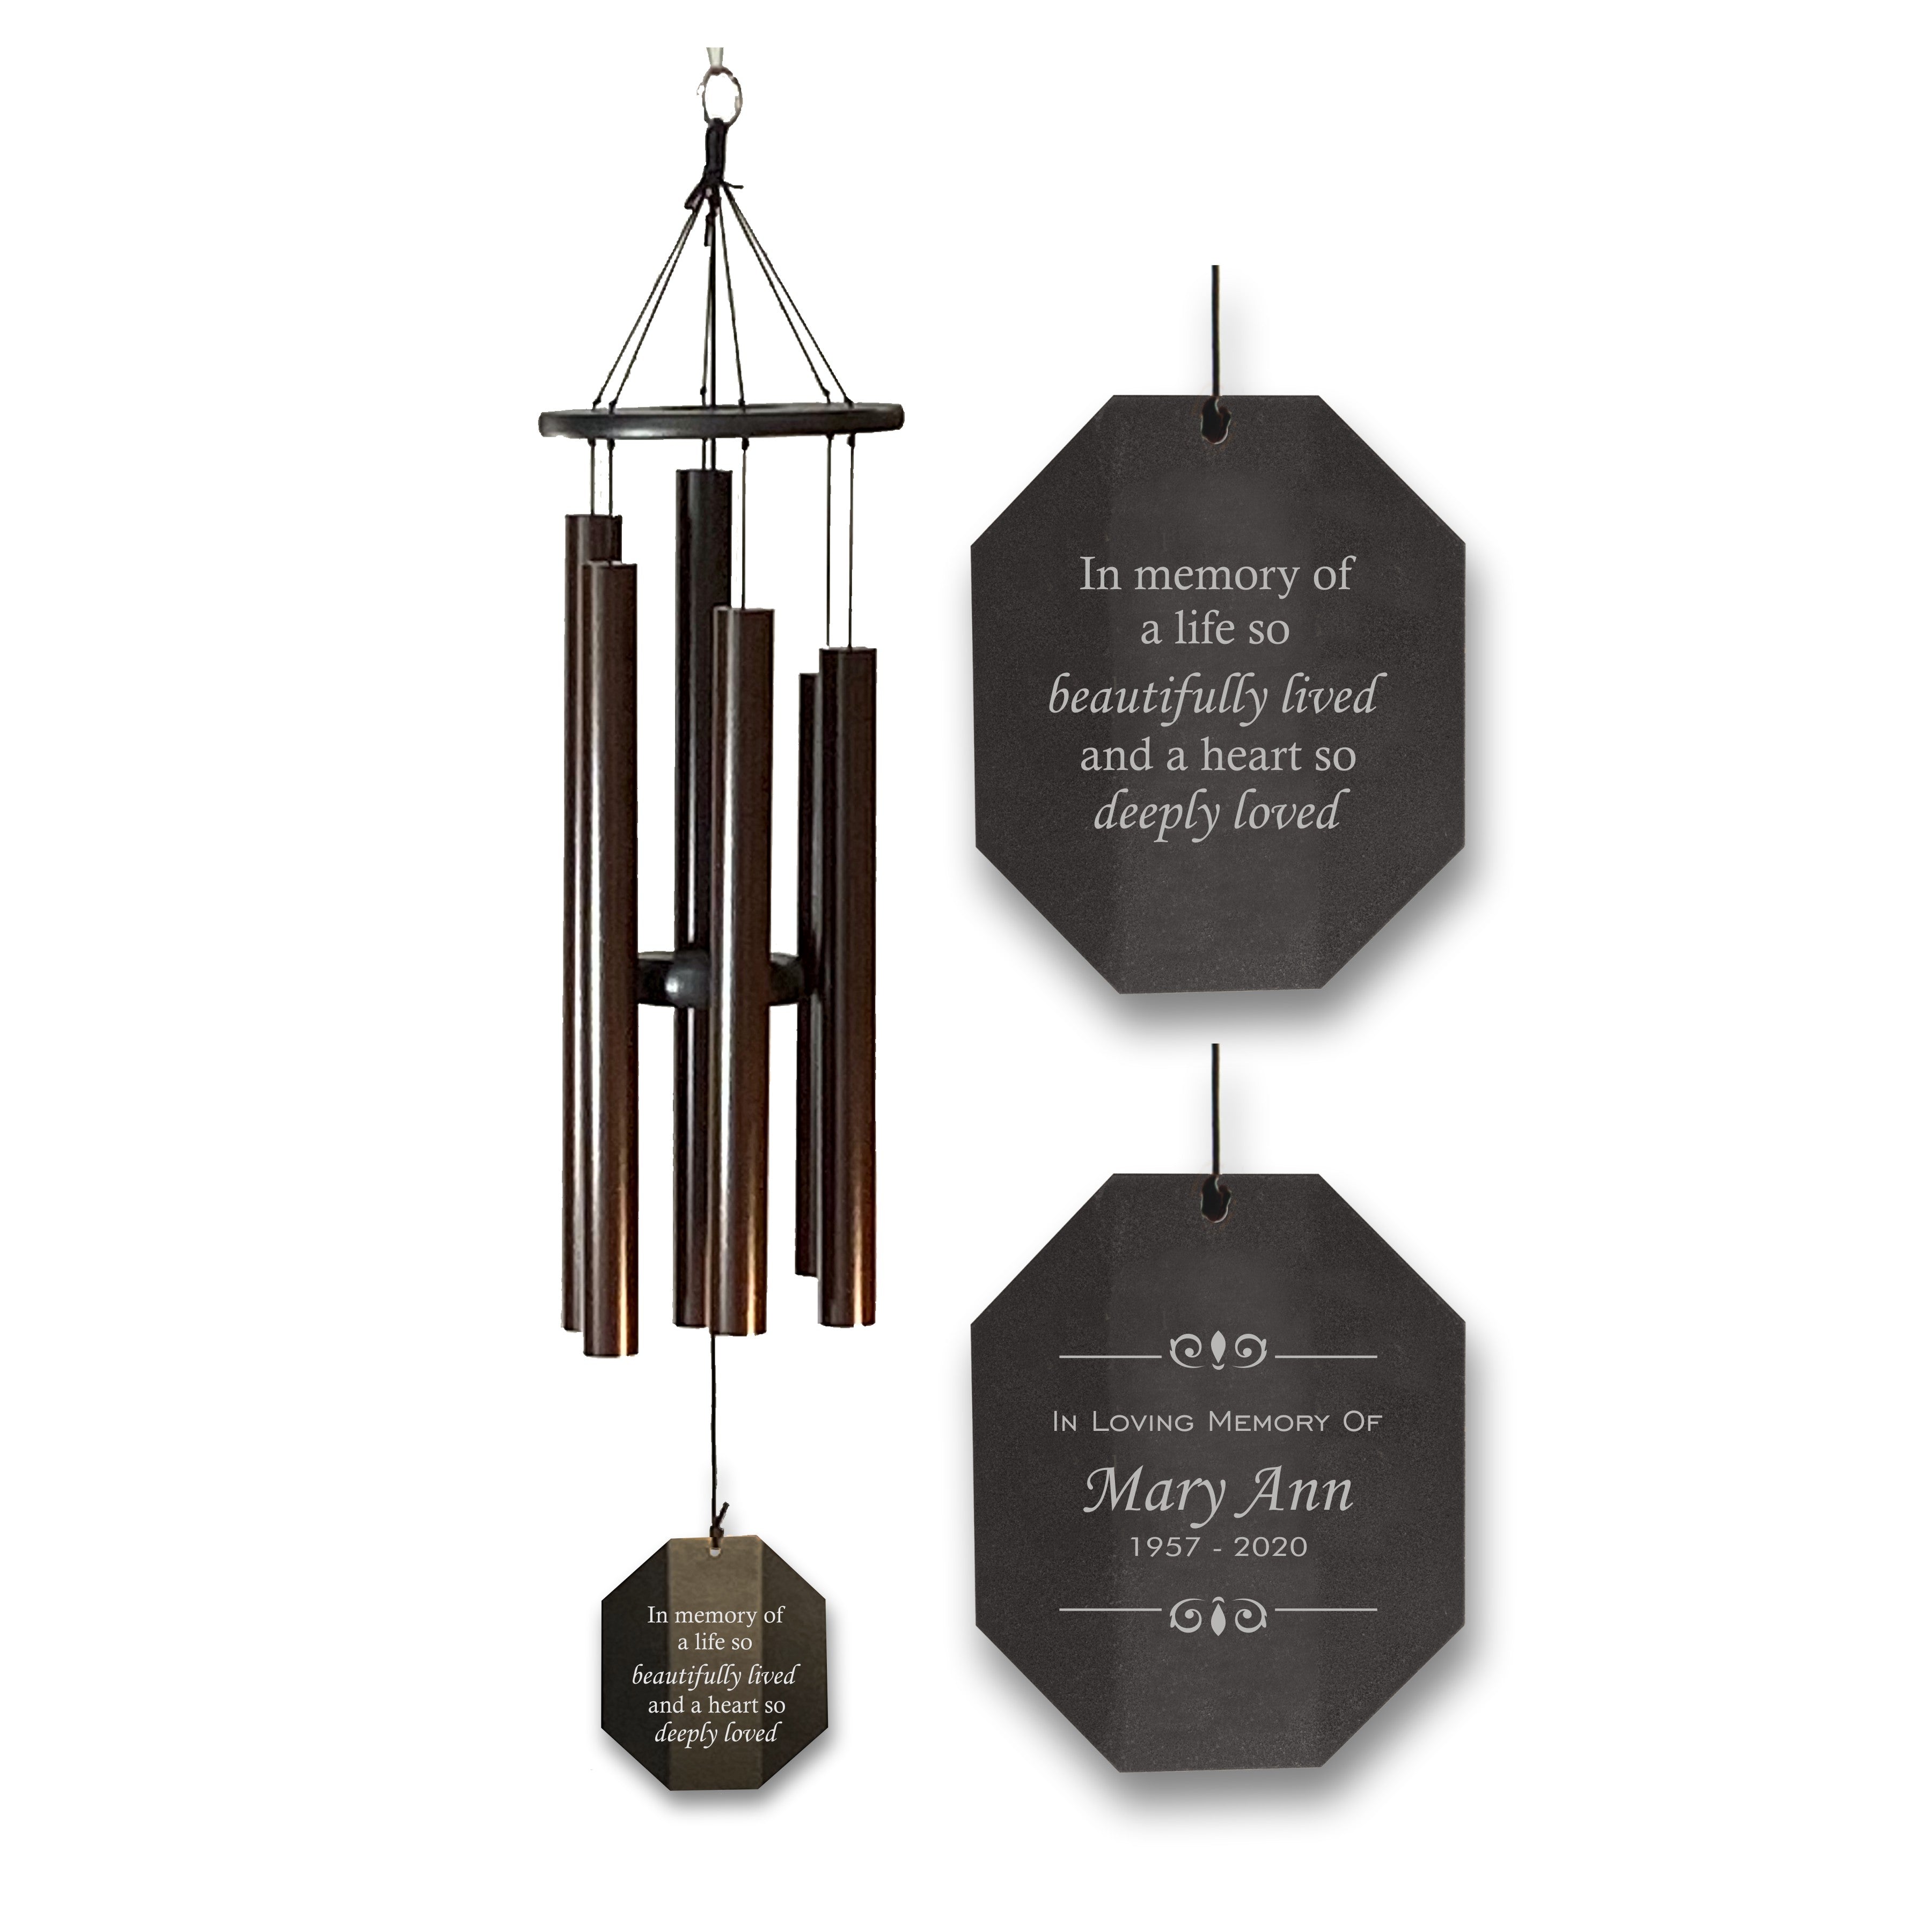 Memorial Wind Chime | A life so beautifully lived | Amish Large Chime